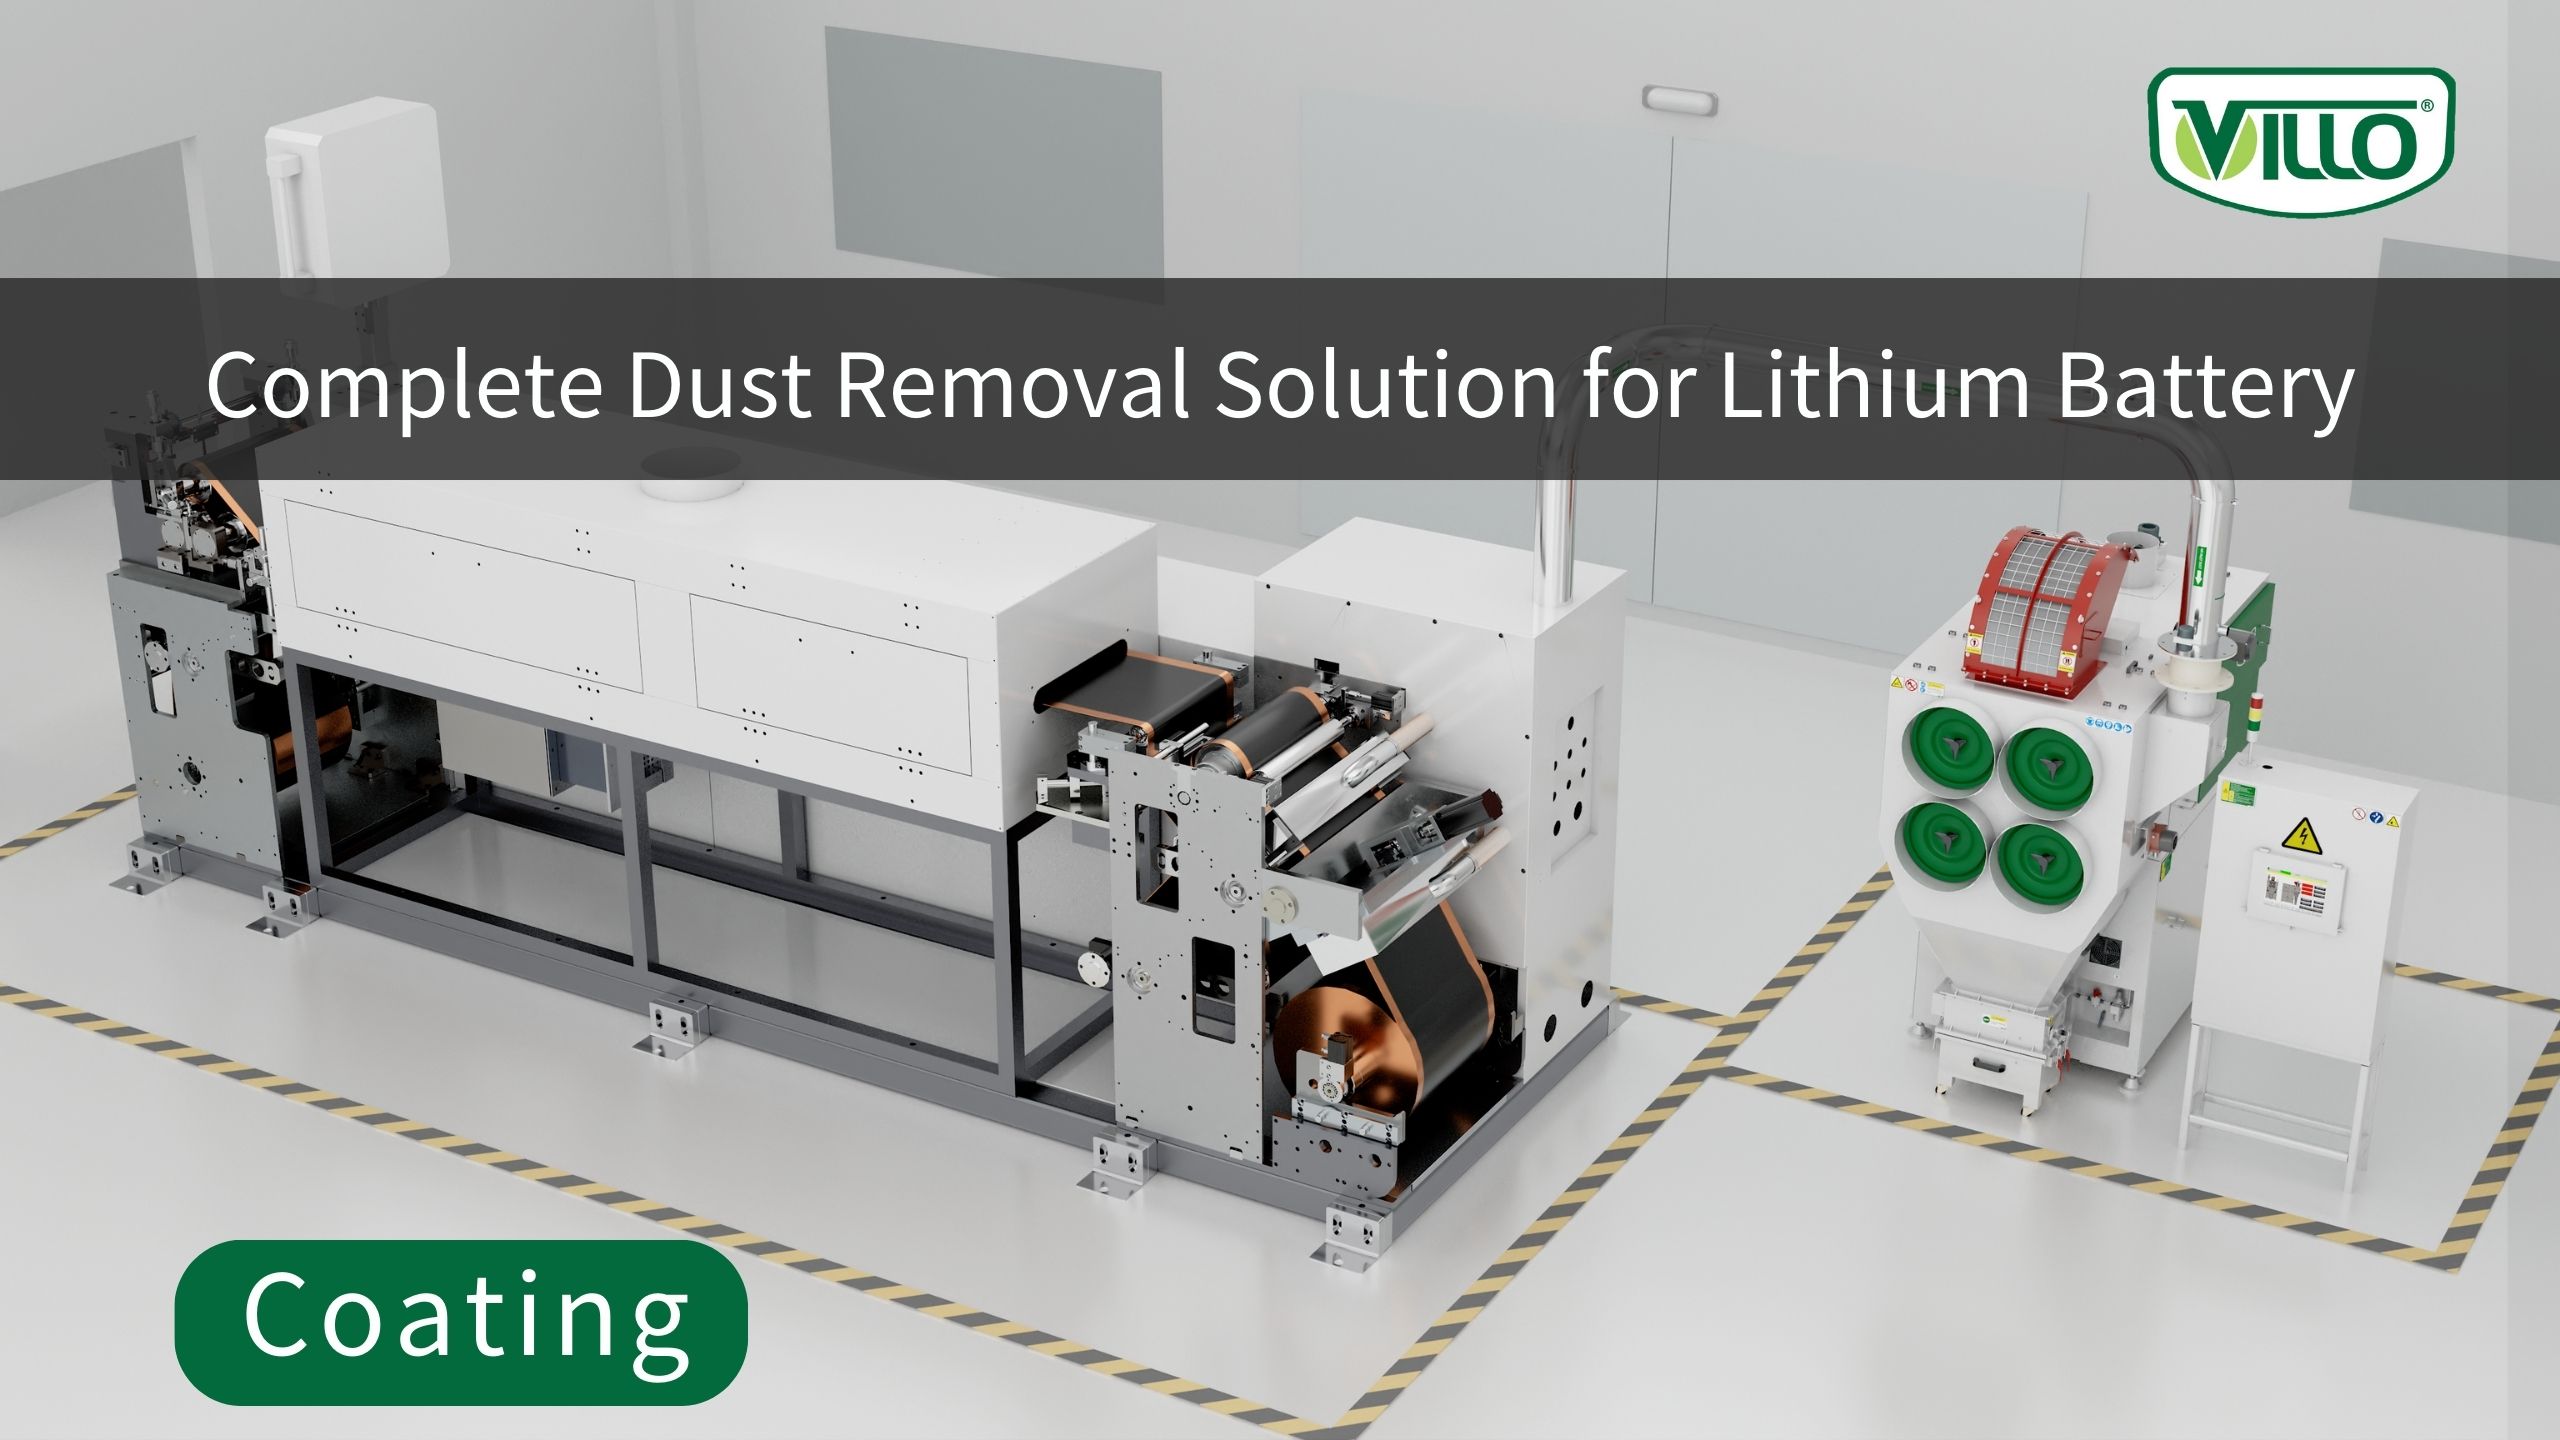 Dust Collection Solutions: Coating